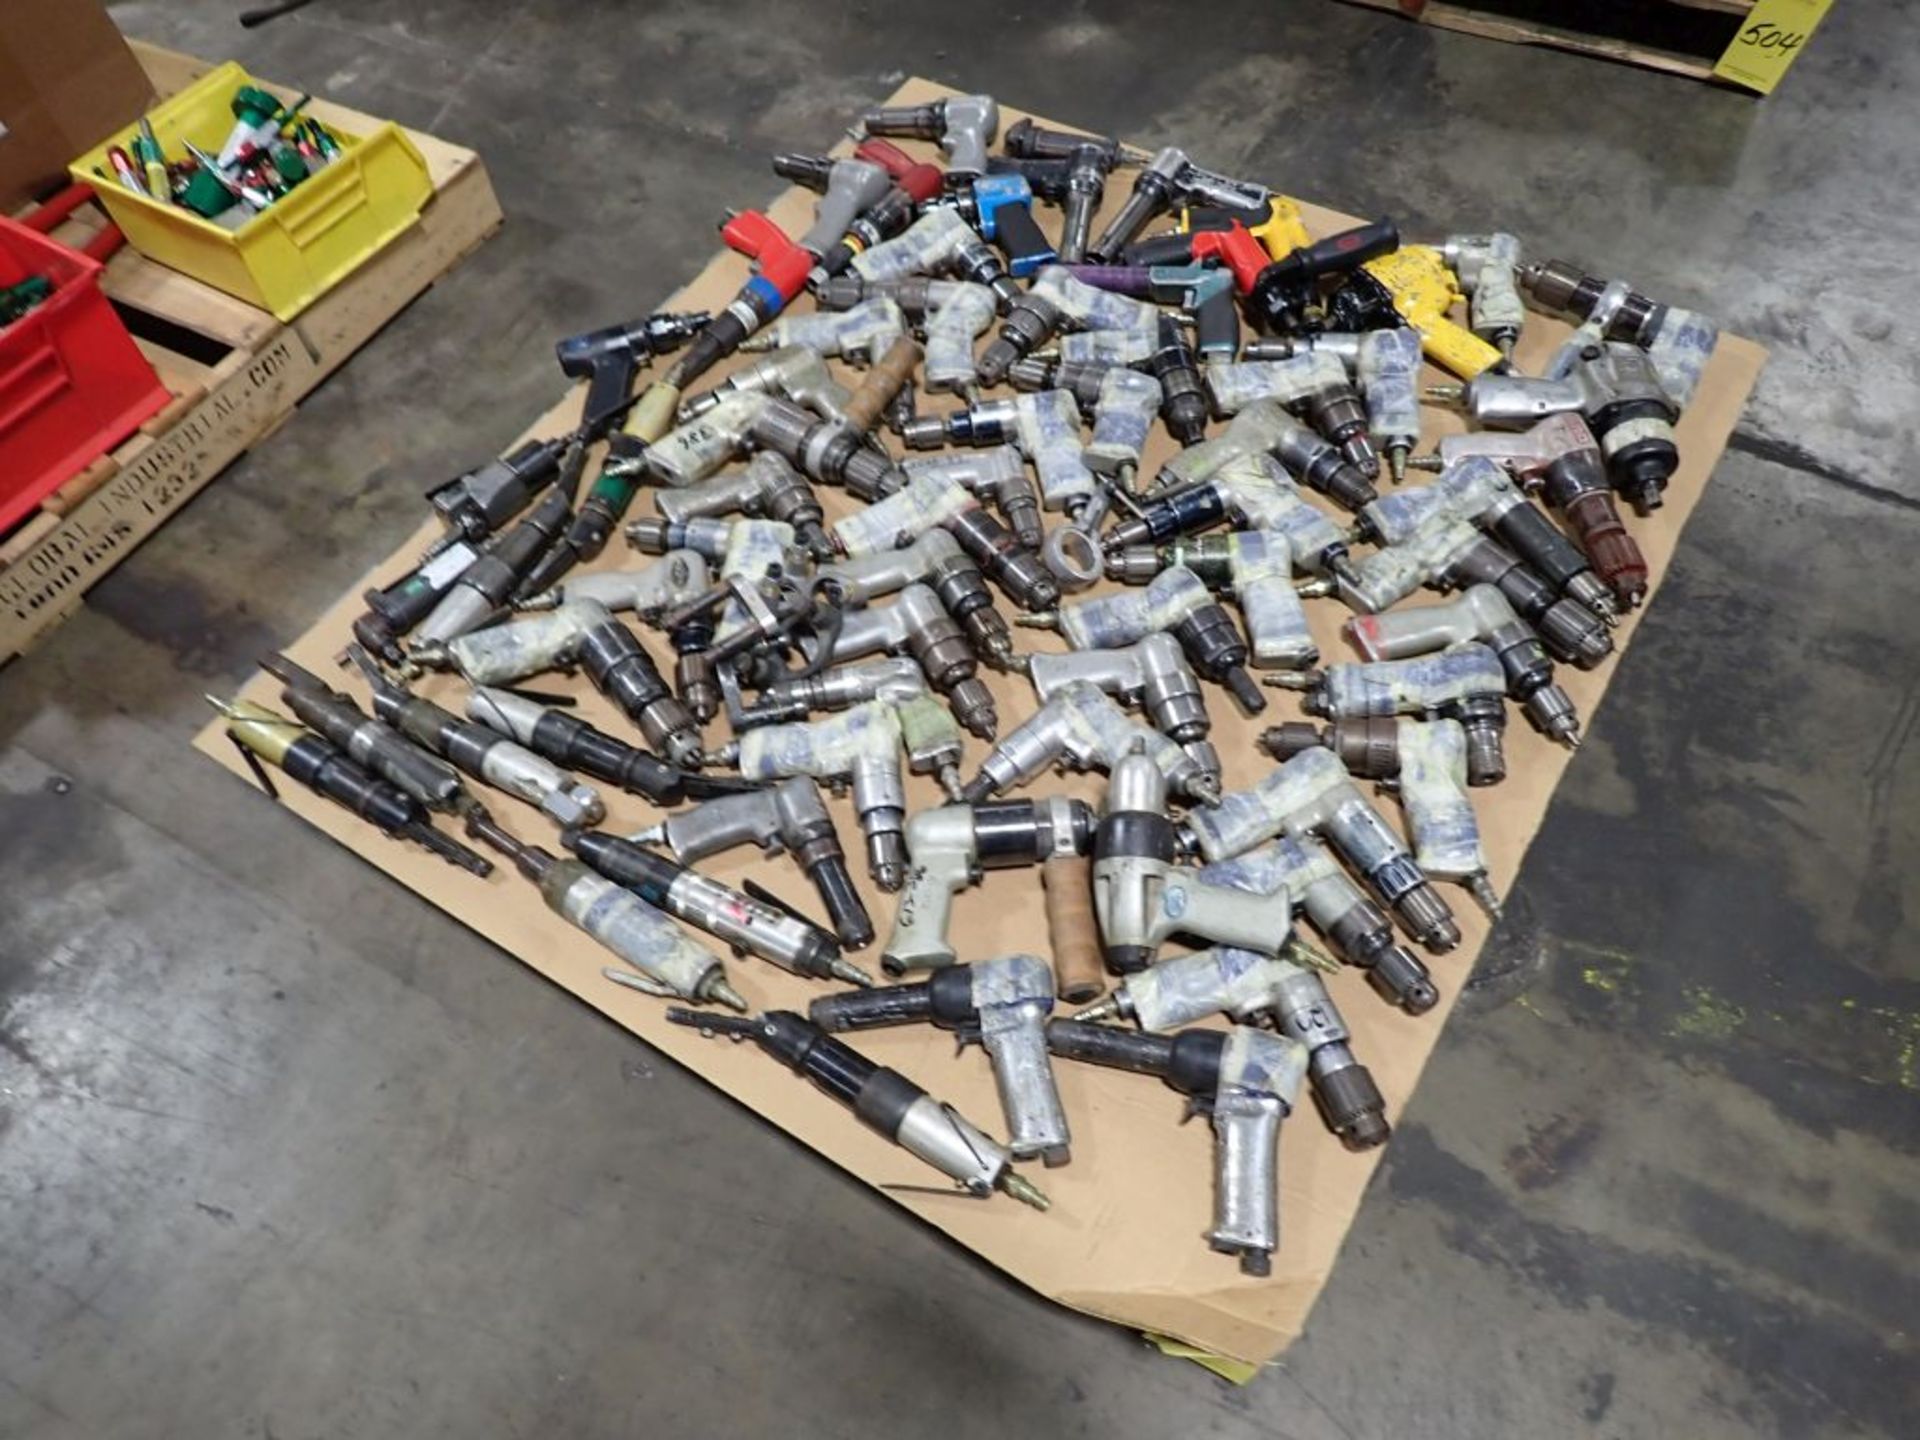 Lot of Pneumatic Tools | Tag: 241503 | Limited Forklift Assistance Available - $10.00 Lot Loading